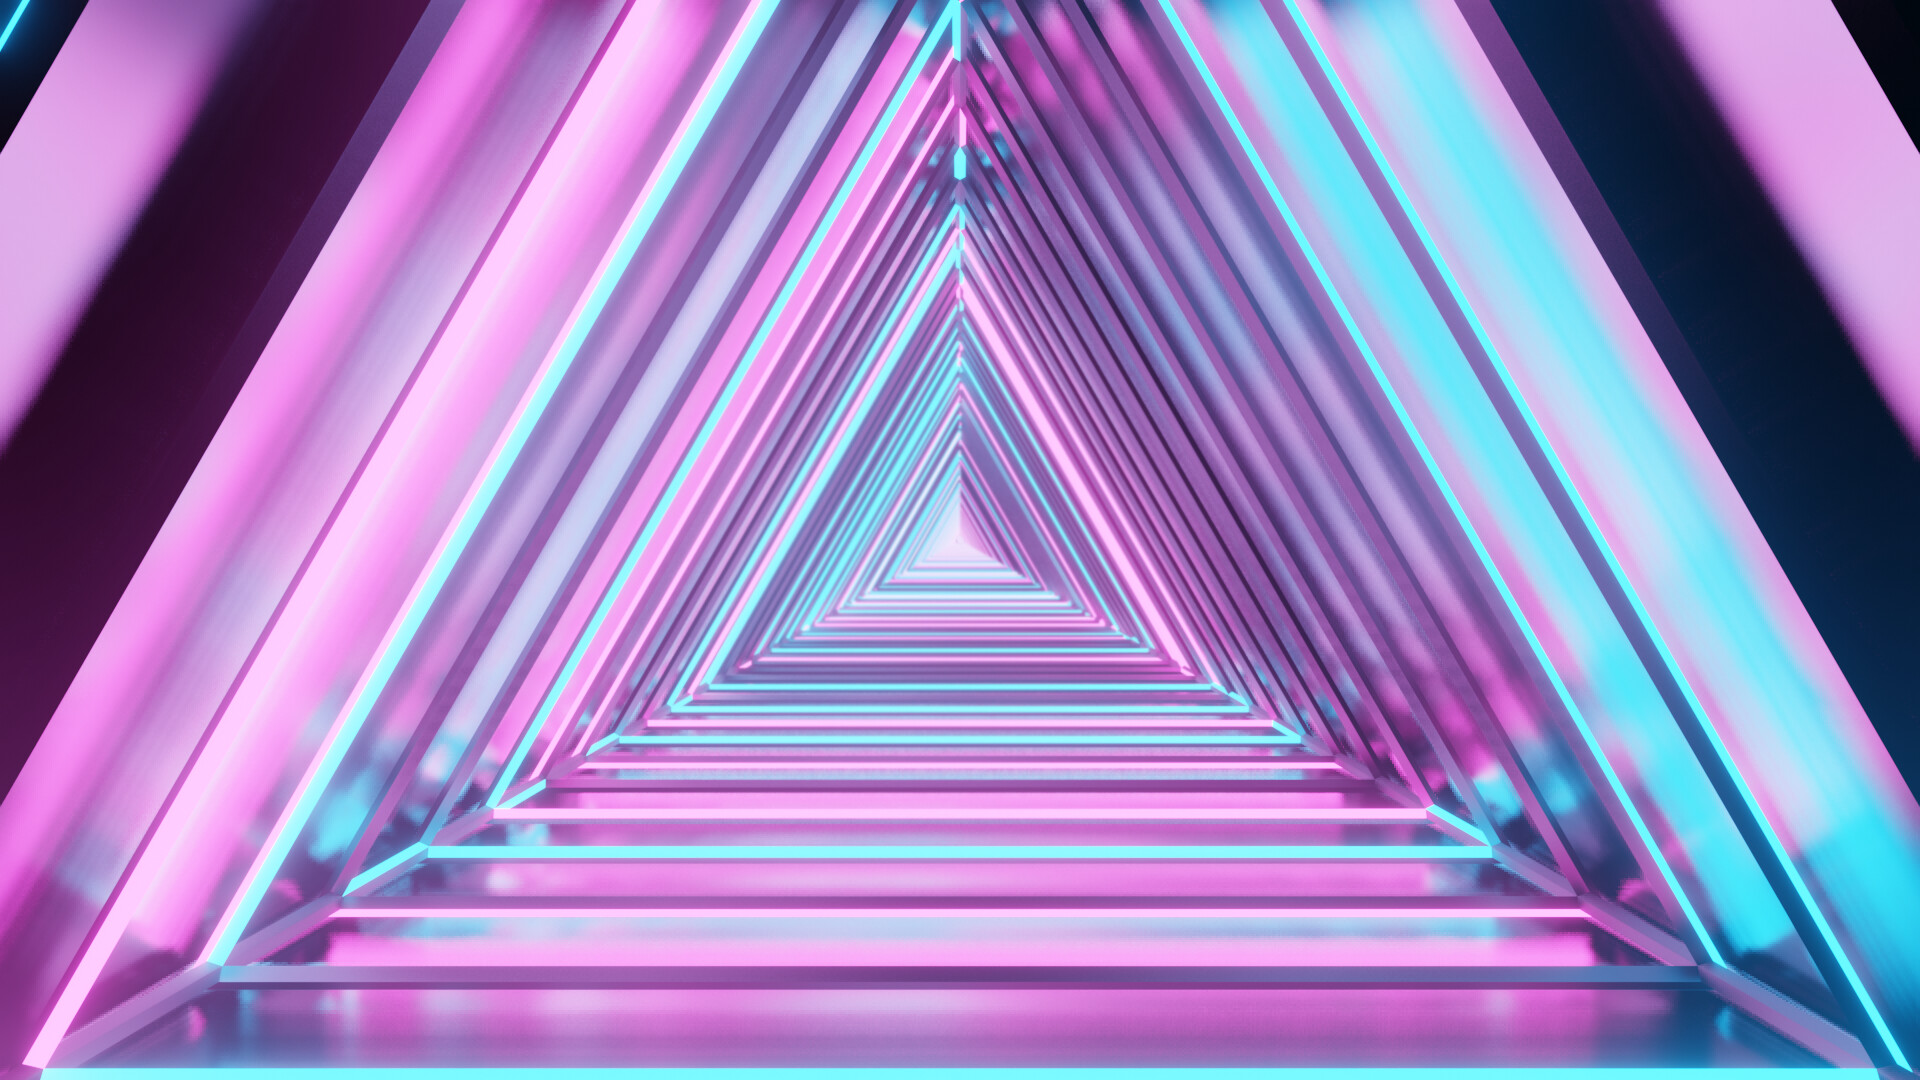 ArtStation - A Abstract Triangles Wallpaper.